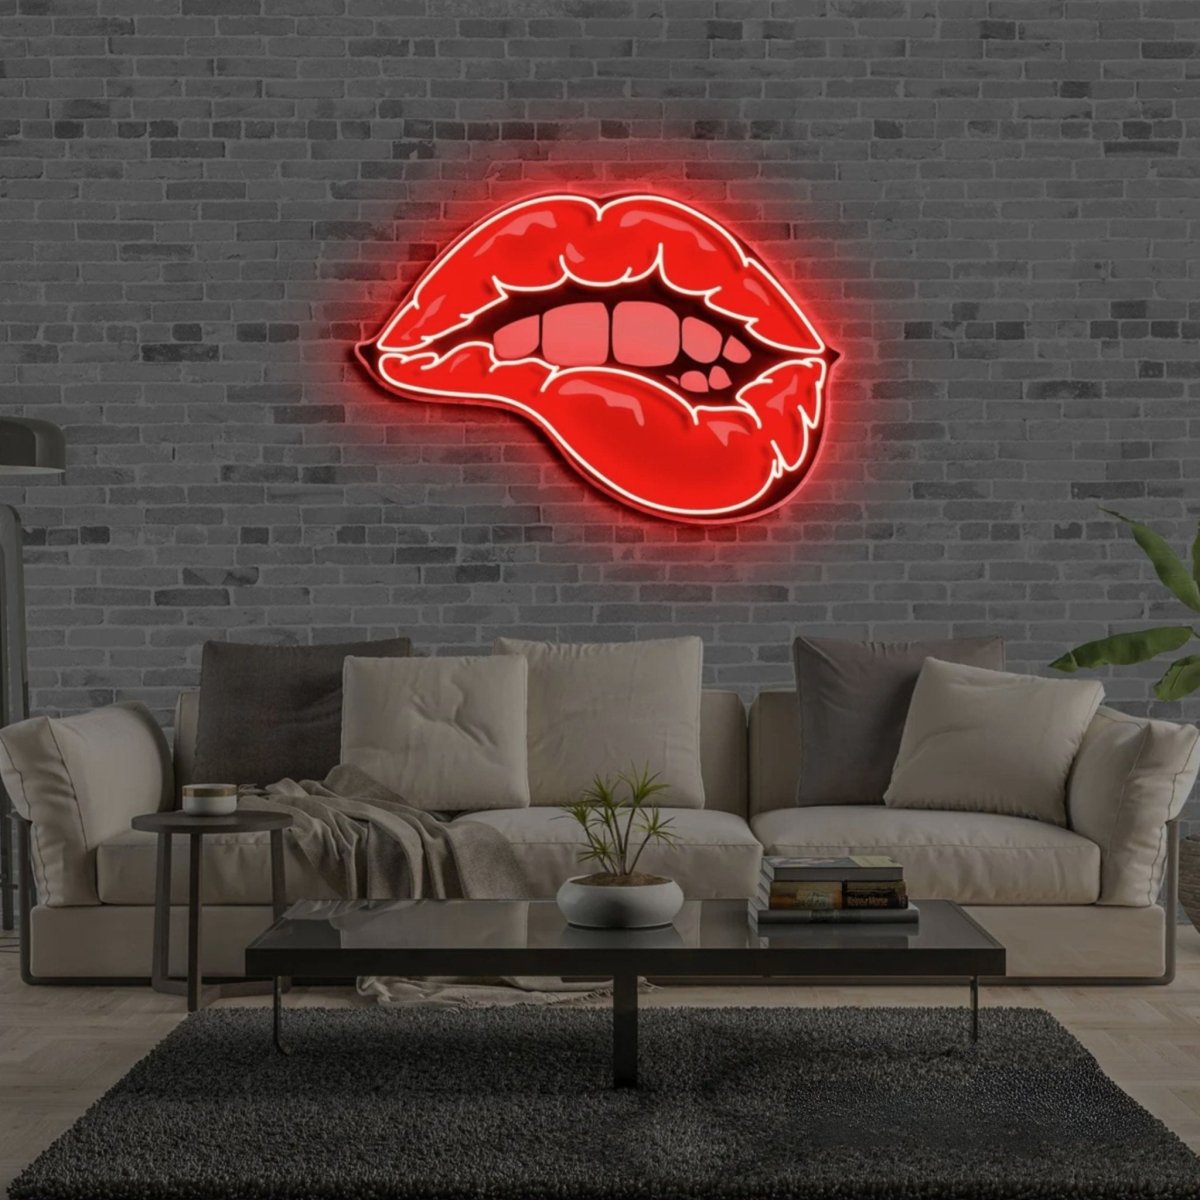 Taste Of Your Lips Neon Sign - LED Lips Sign Neon Sign